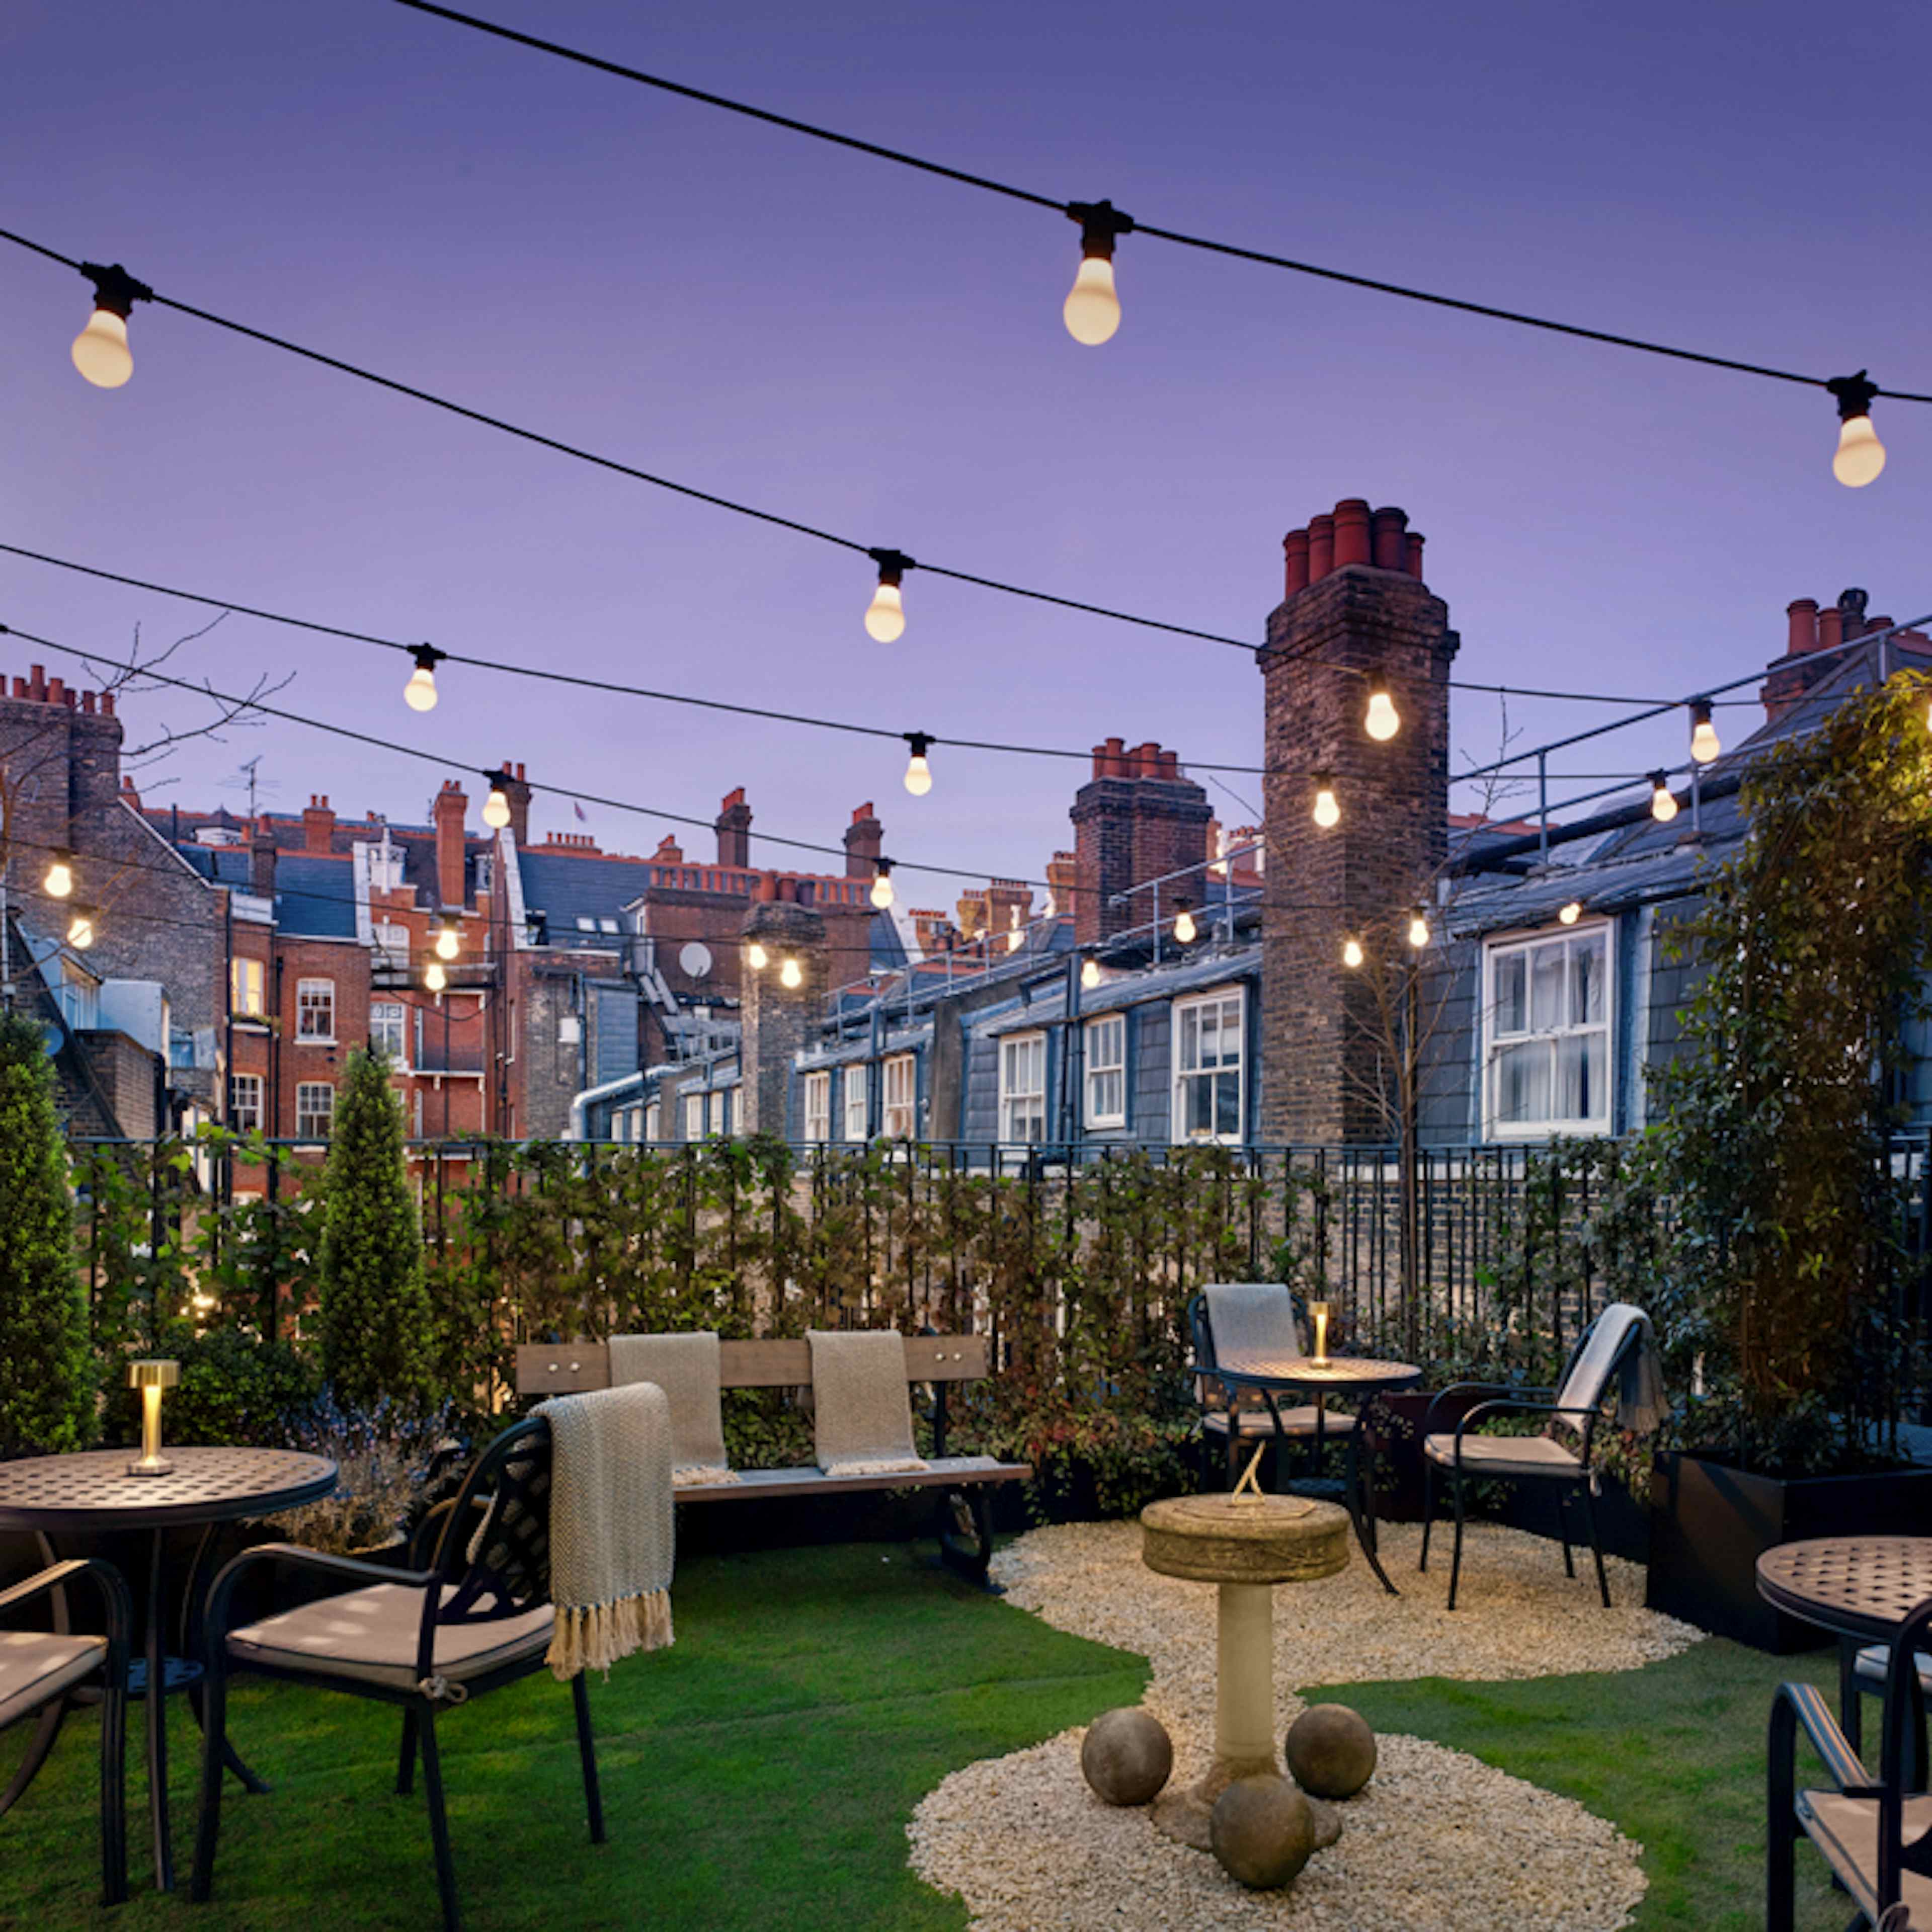 The Residence at Holmes Hotel London - The Residence image 2